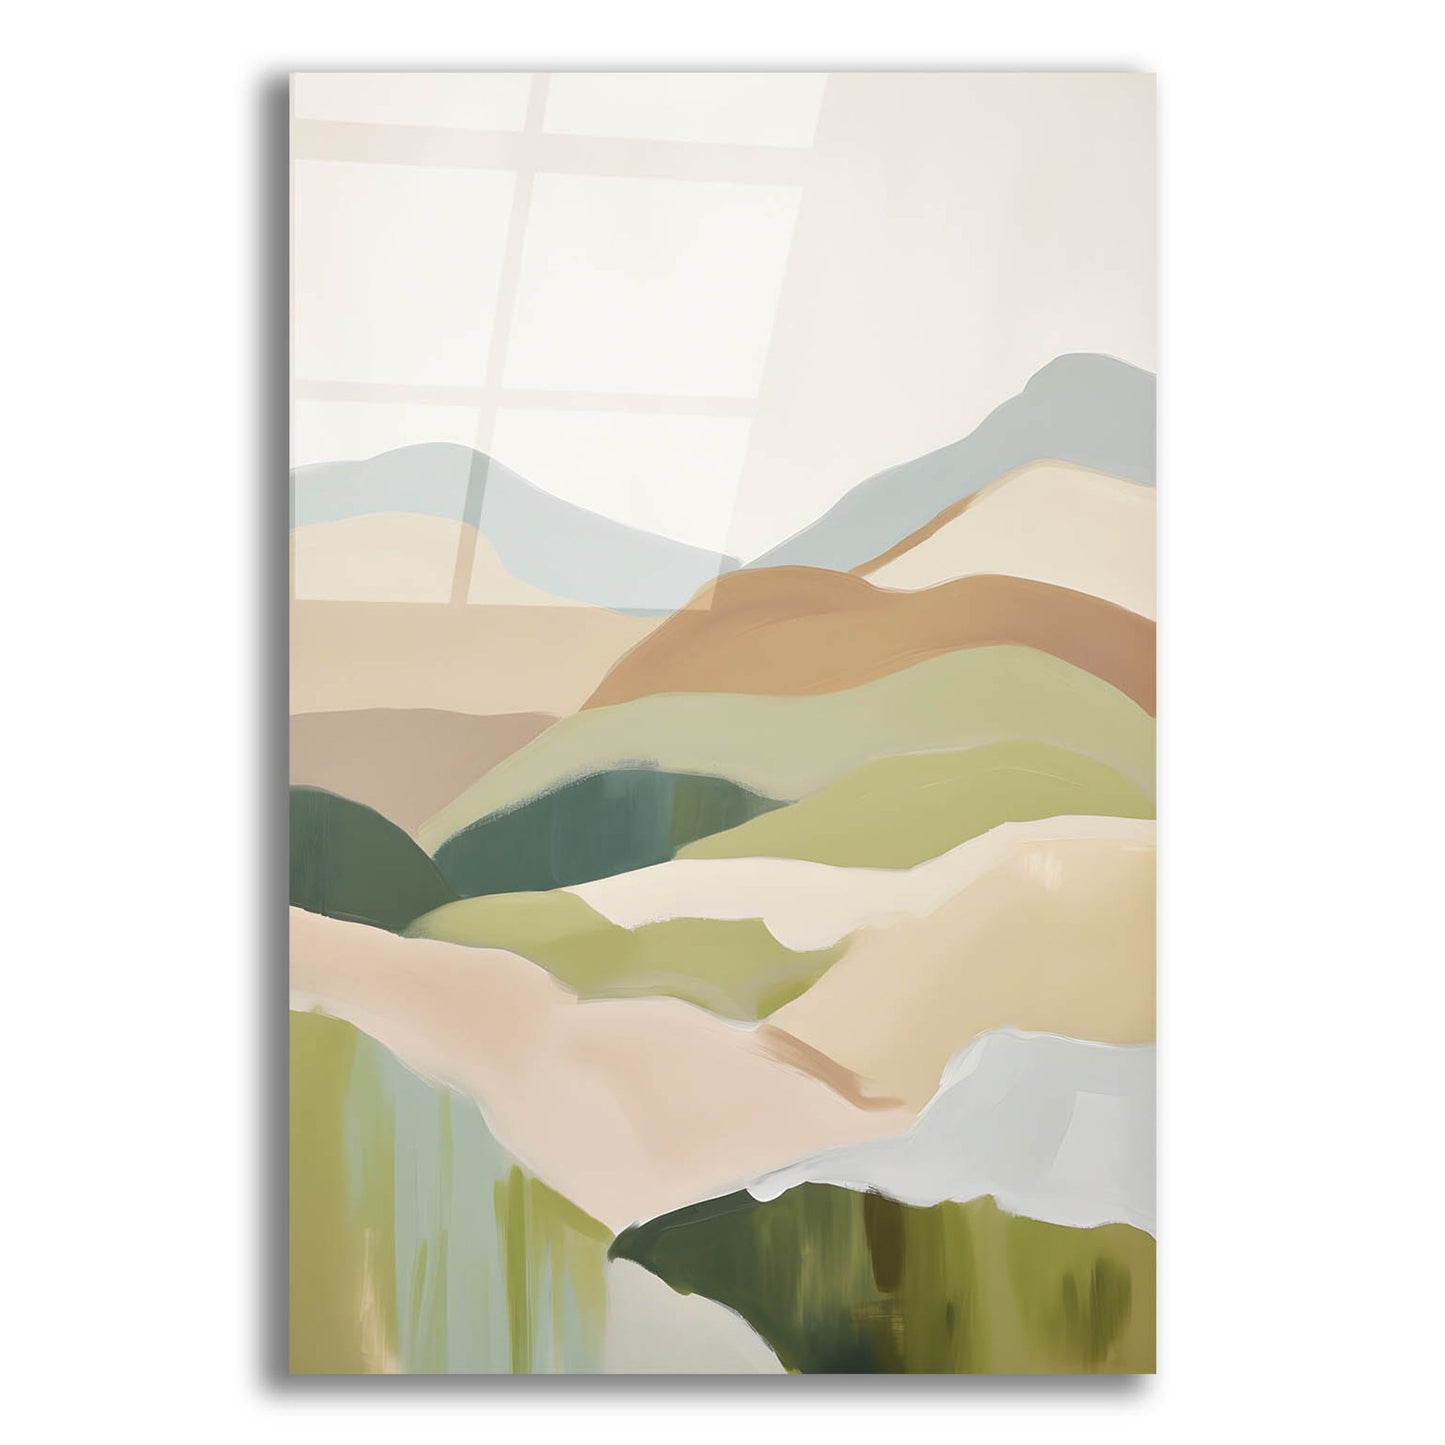 Epic Art 'Abstract Mountain 2' by Petals Prints Design, Acrylic Glass Wall Art